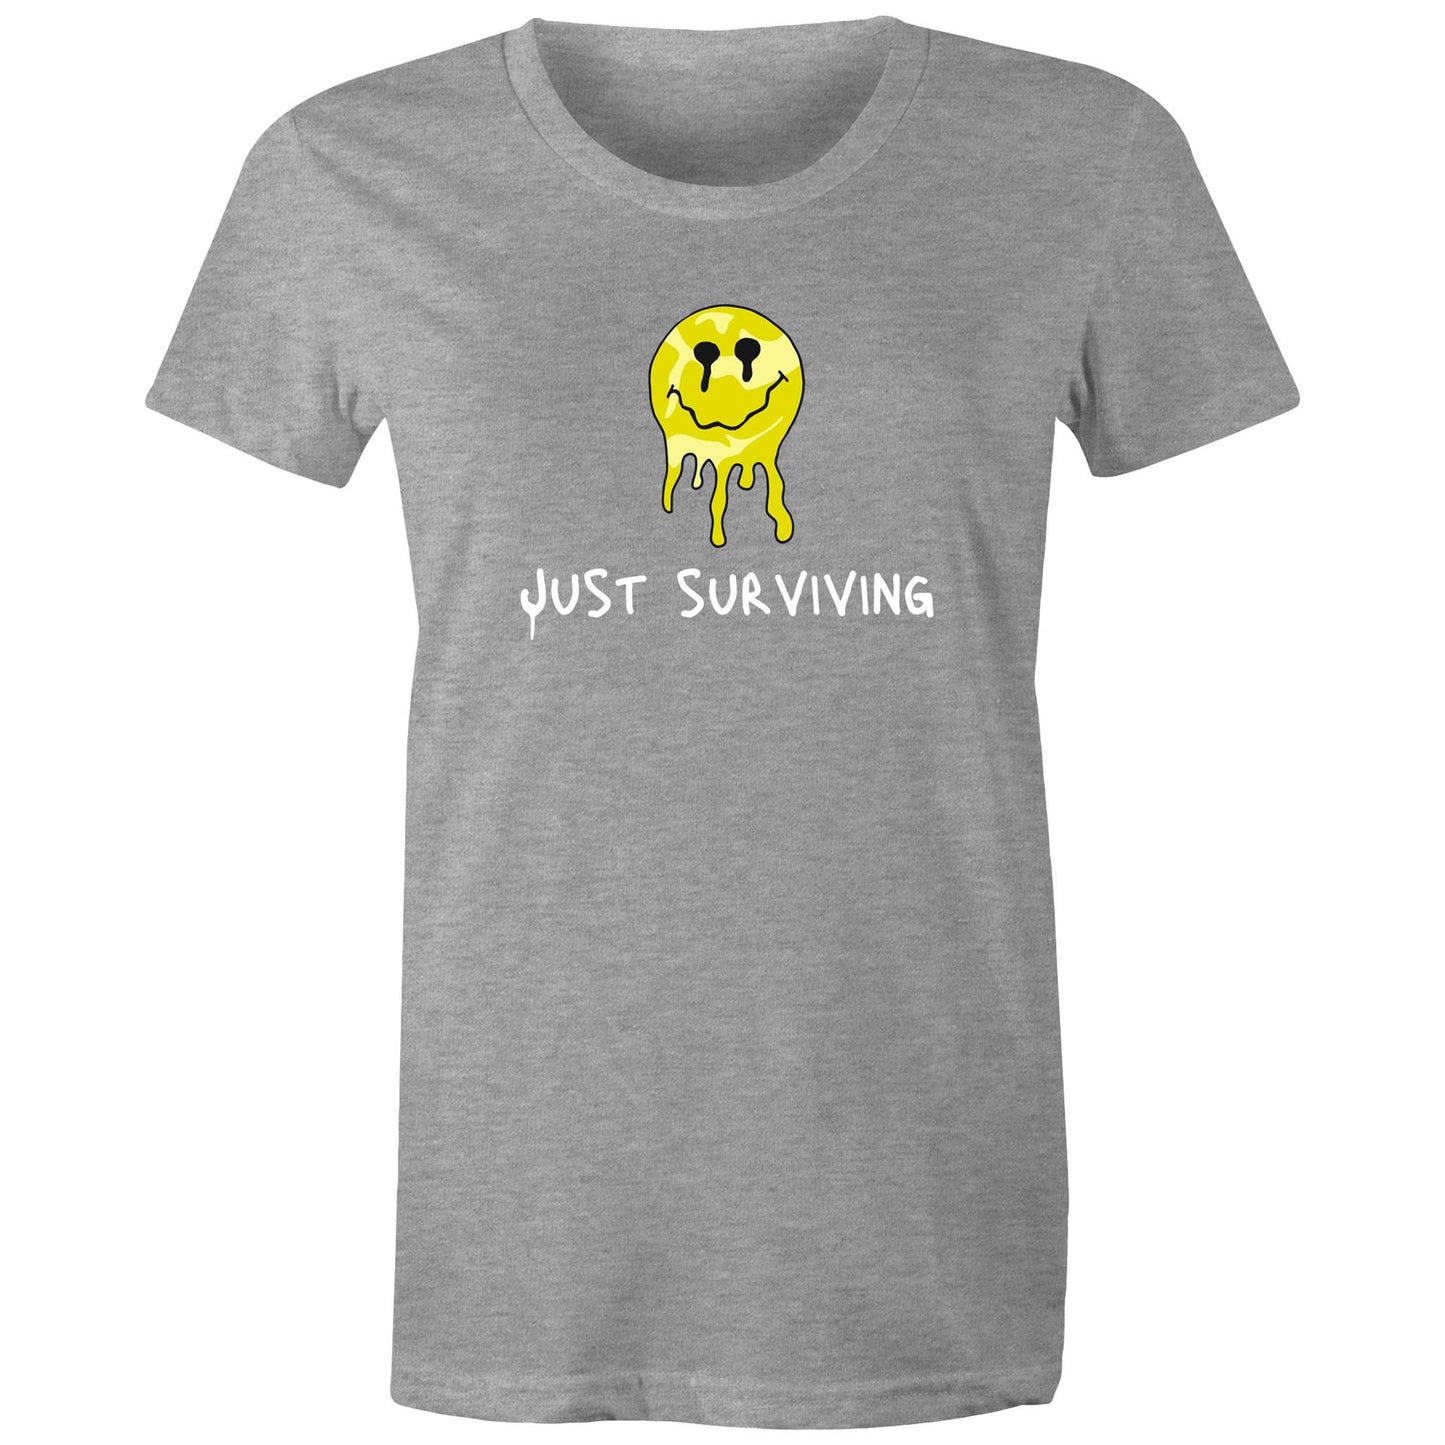 Womens Tee - Just Surviving